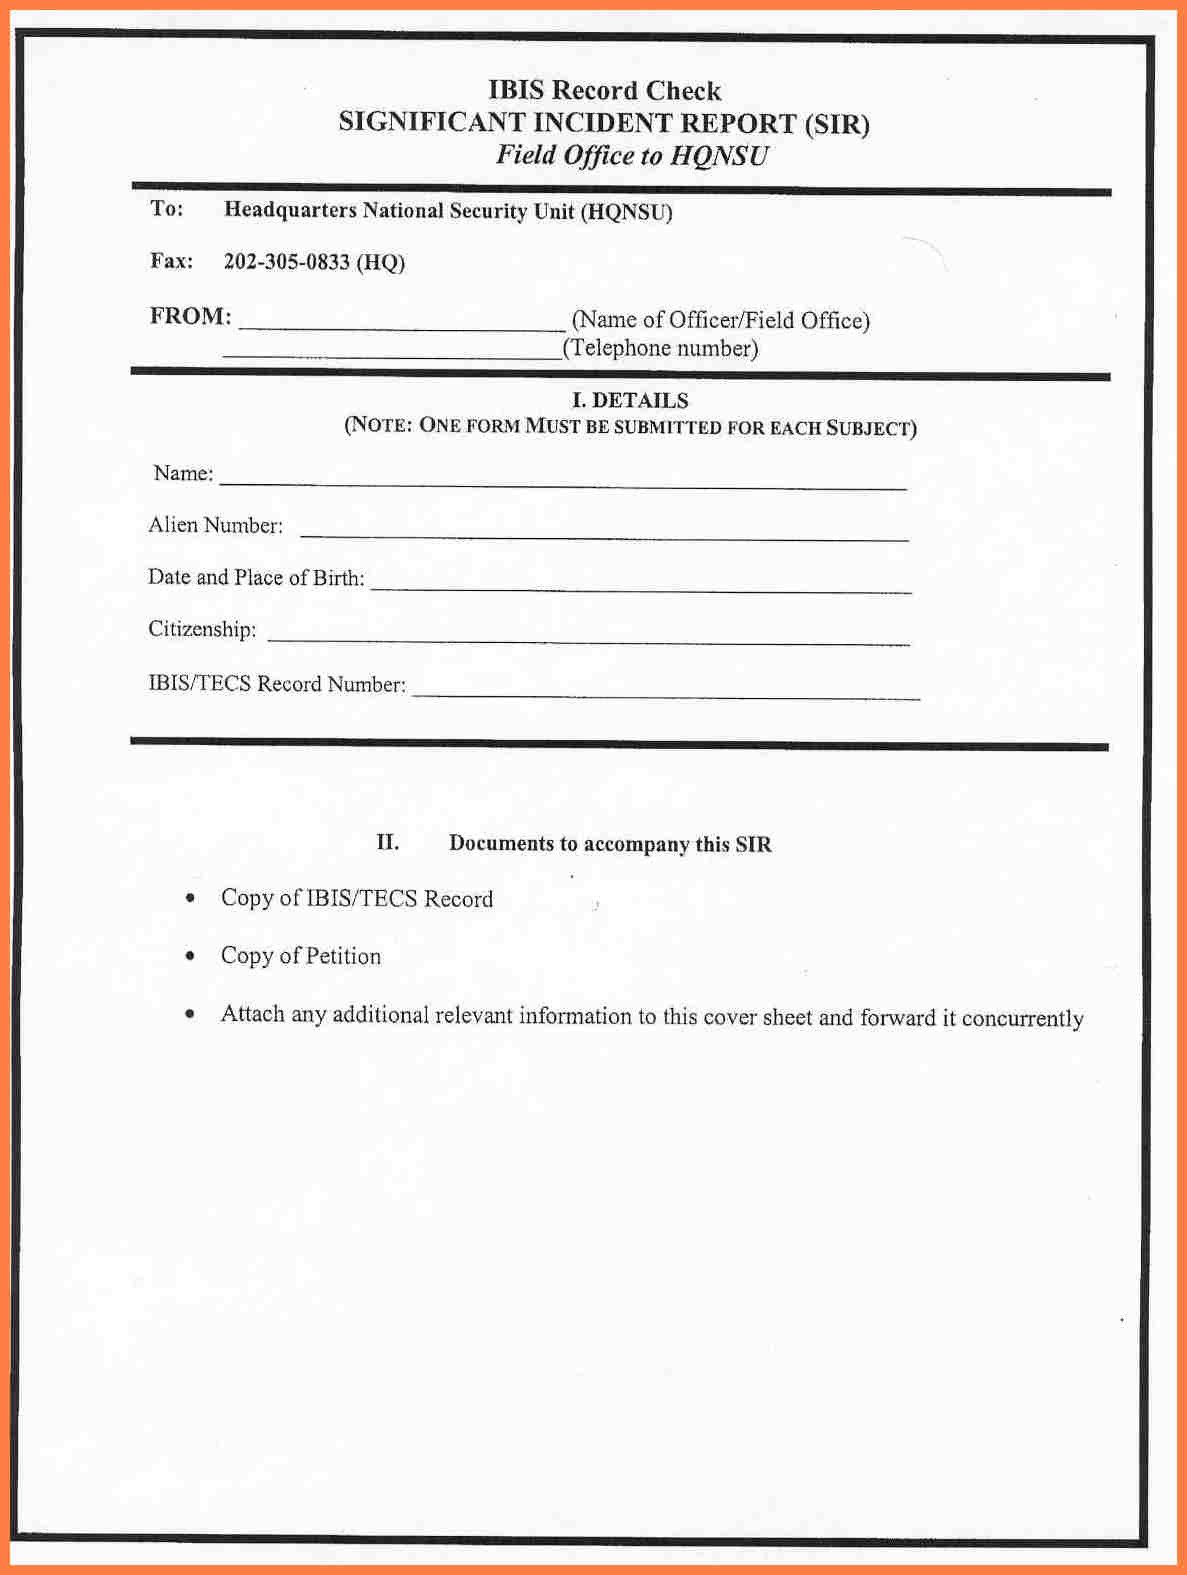 Accident Reporting form Template 5 Pany Accident Report form